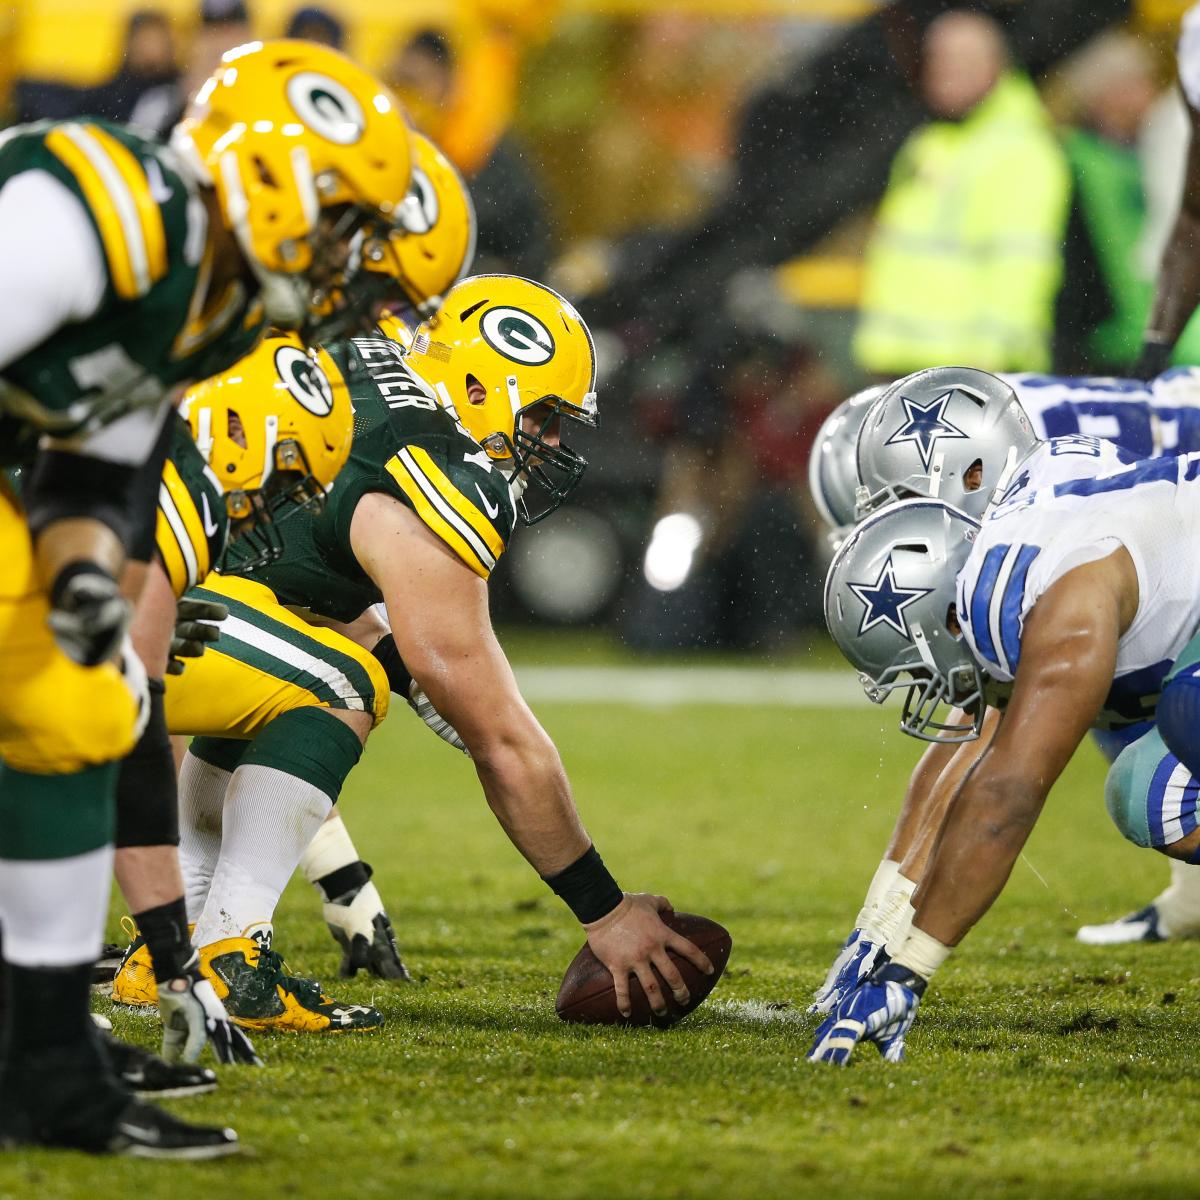 Cowboys vs. Packers 2015 results: 3 things we learned from Green